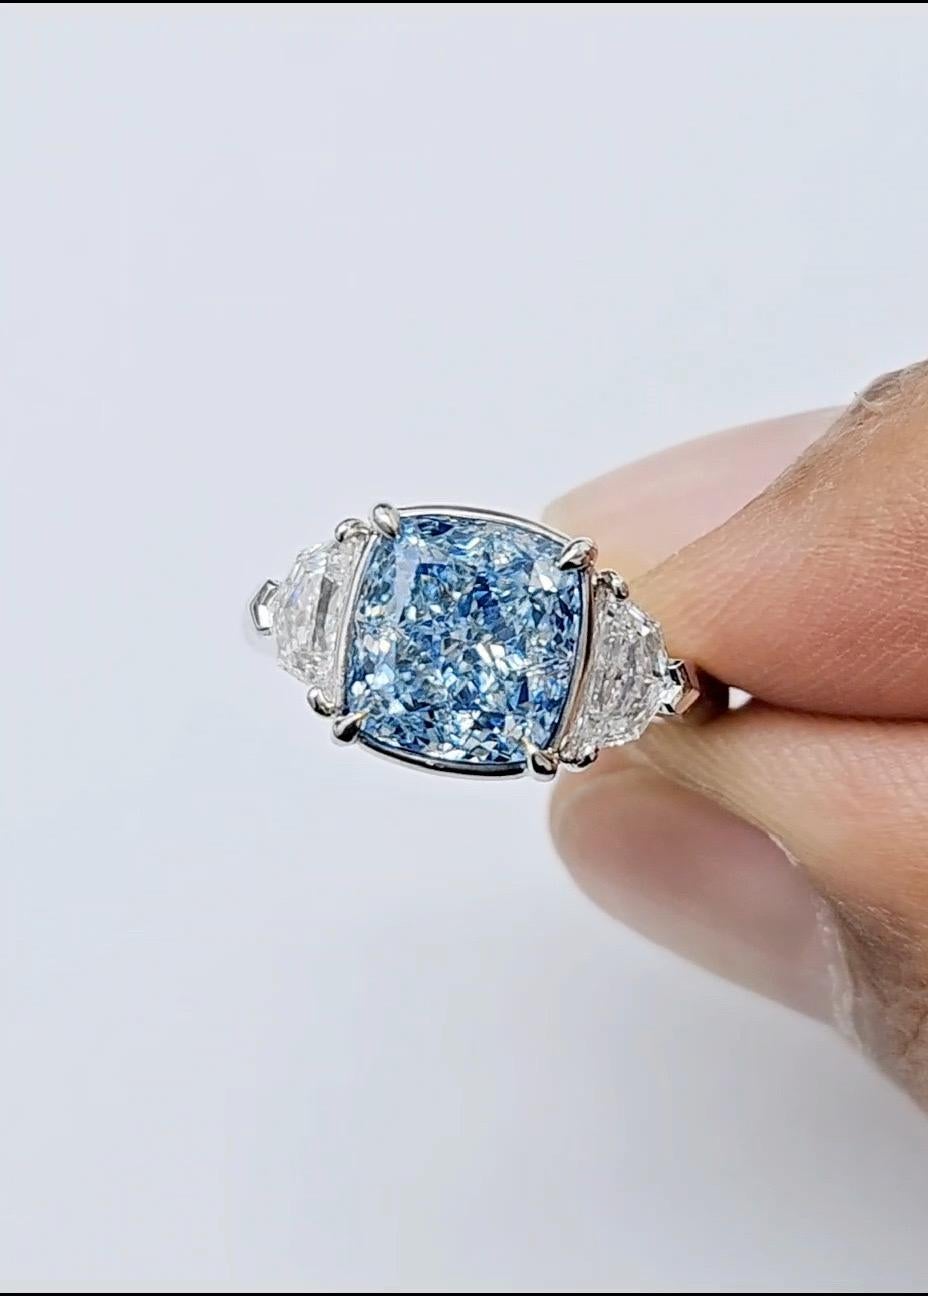 From Emilio Jewelry, a well known and respected wholesaler/dealer located on New York’s iconic Fifth Avenue, 
Featuring a very special center diamond Gia Certified as Natural 4.00 Carat natural Fancy Blue. 
Please inquire for more images,